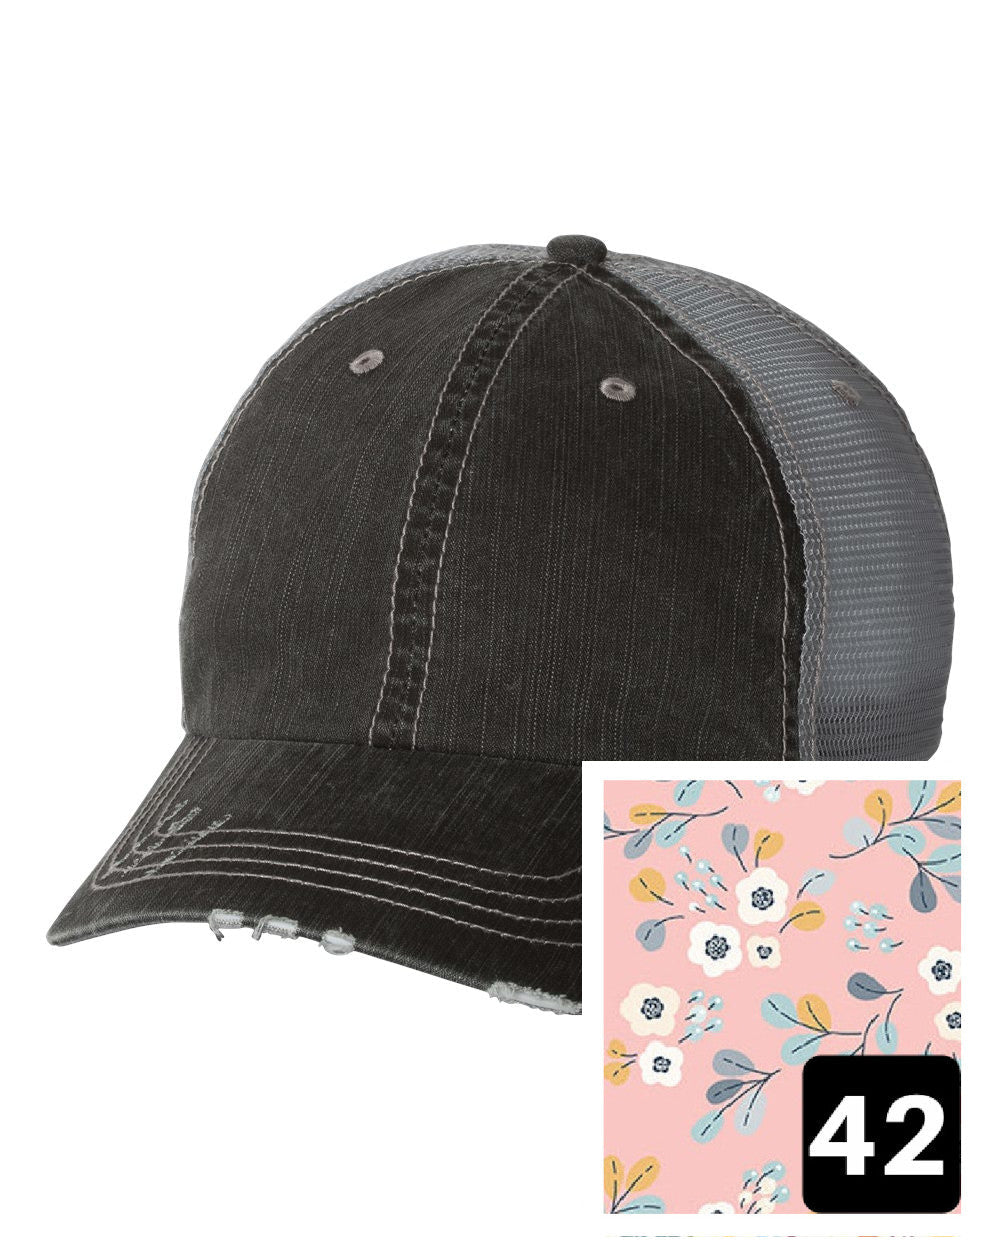 gray distressed trucker hat with light blue and pink mosaic fabric state of South Dakota